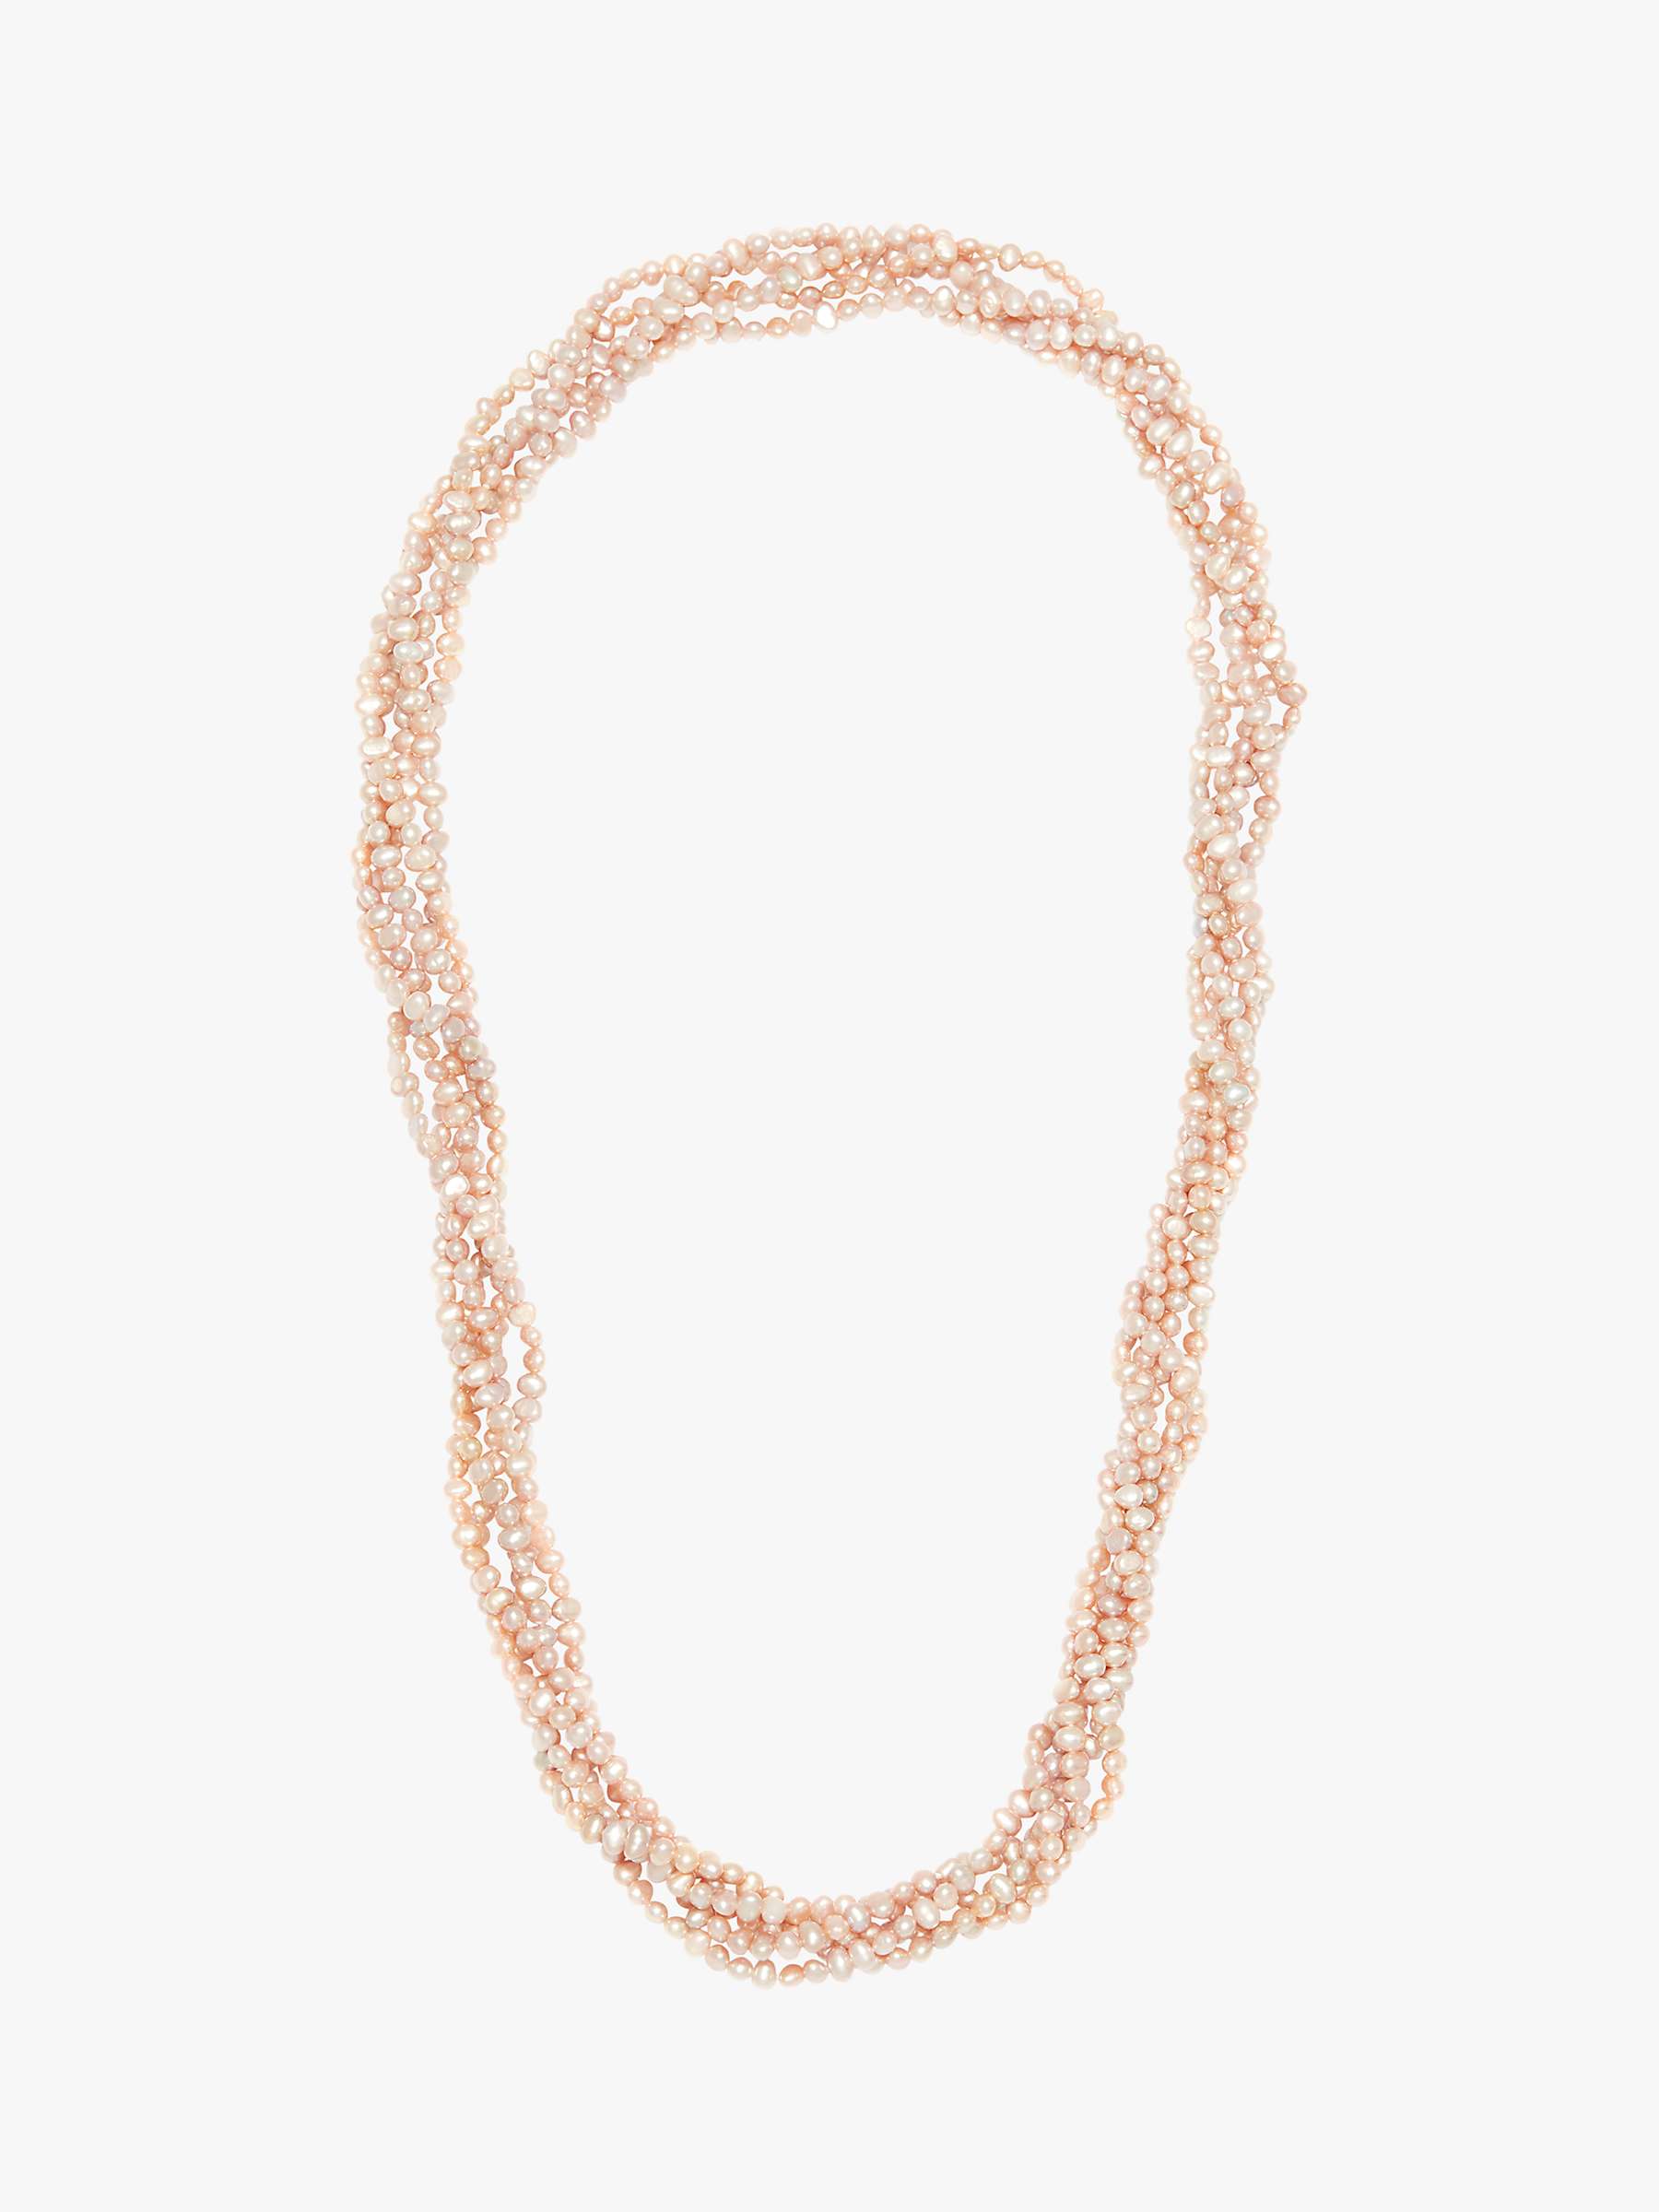 Buy A B Davis Freshwater Baroque Pearl 6 Row Twist Opera Length Necklace Online at johnlewis.com